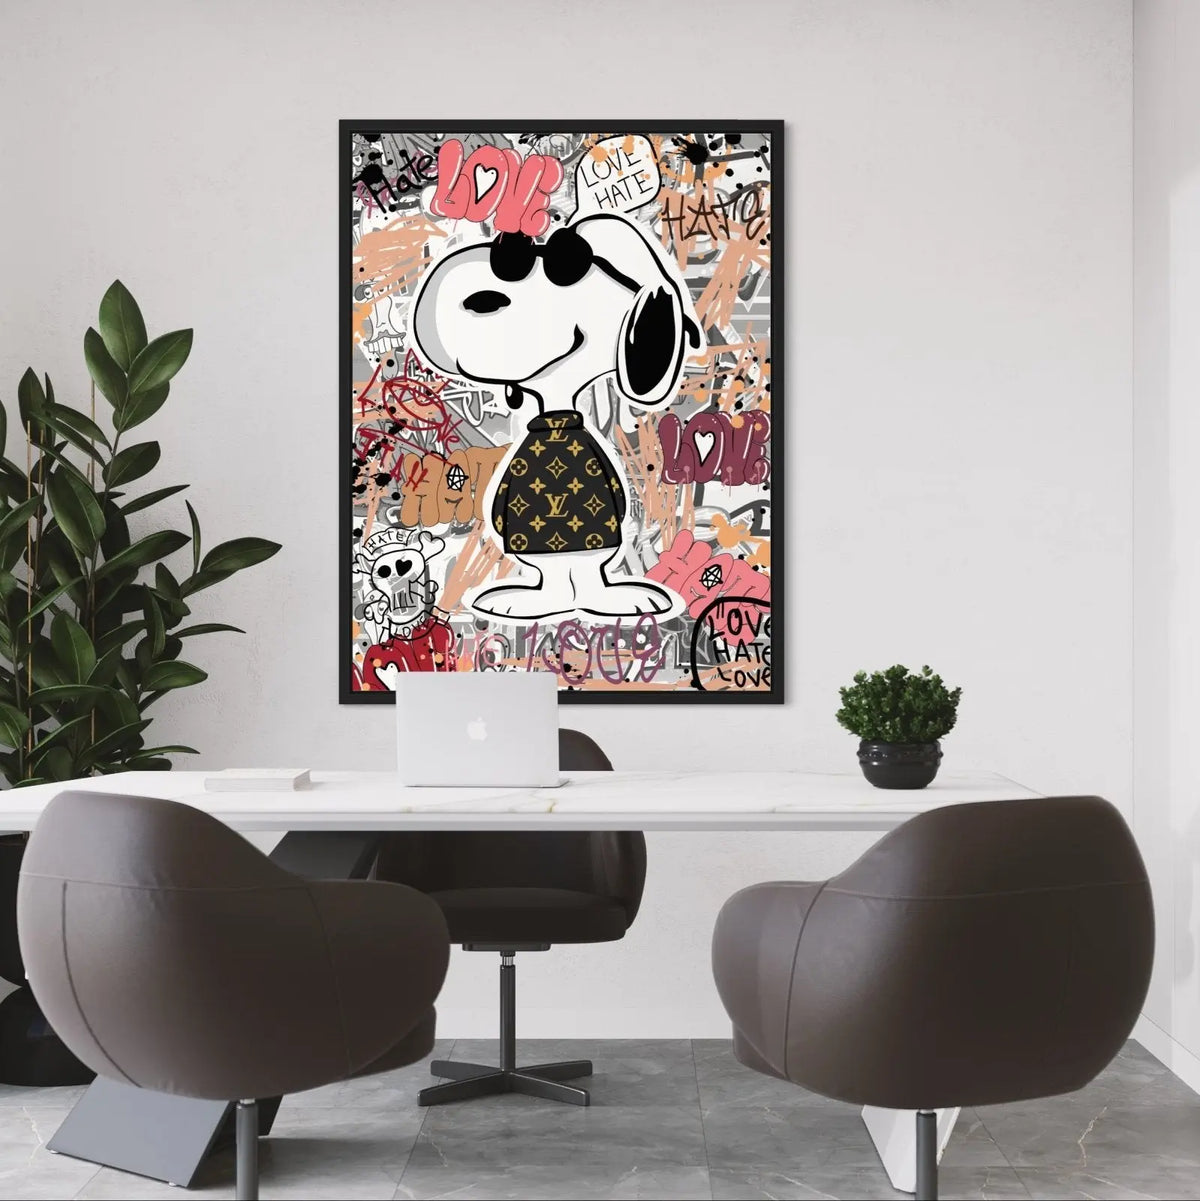 "SNOOPY ART" - Art For Everyone